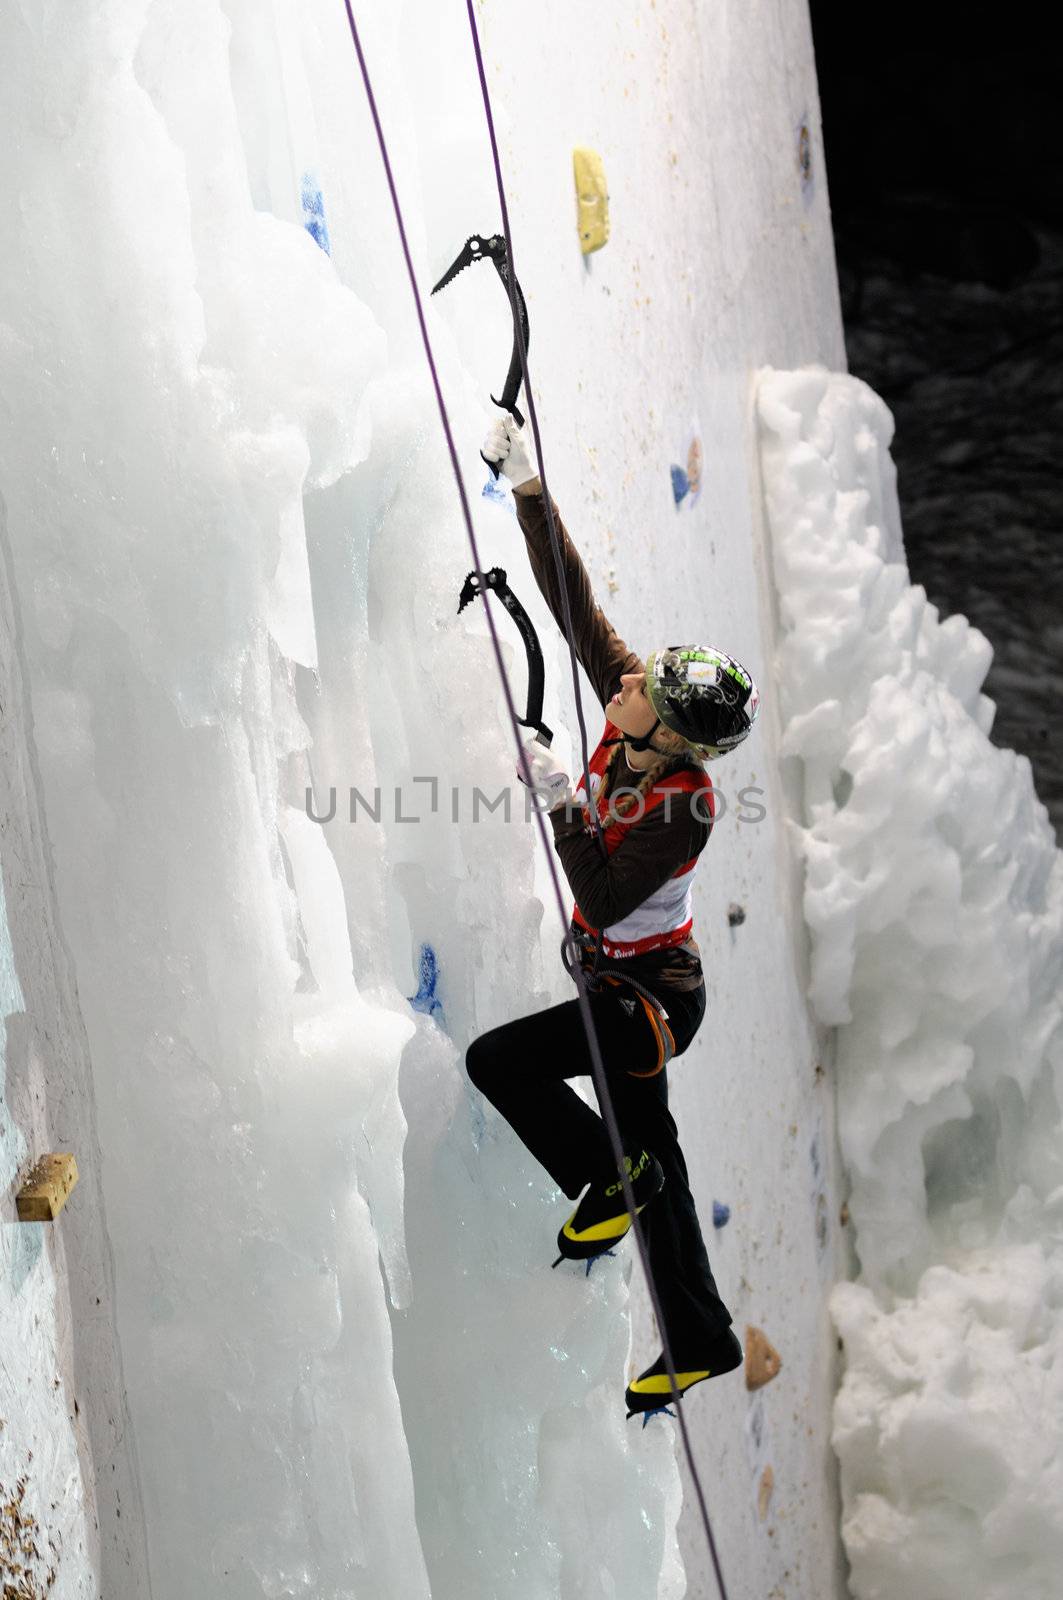 UNKEN, AUSTRIA - FEB 19: Ice climbing european cup finals. Young german Christina Huber reaches the second place in the final competition on February 19, 2011 in Heutal, Unken in Austria.